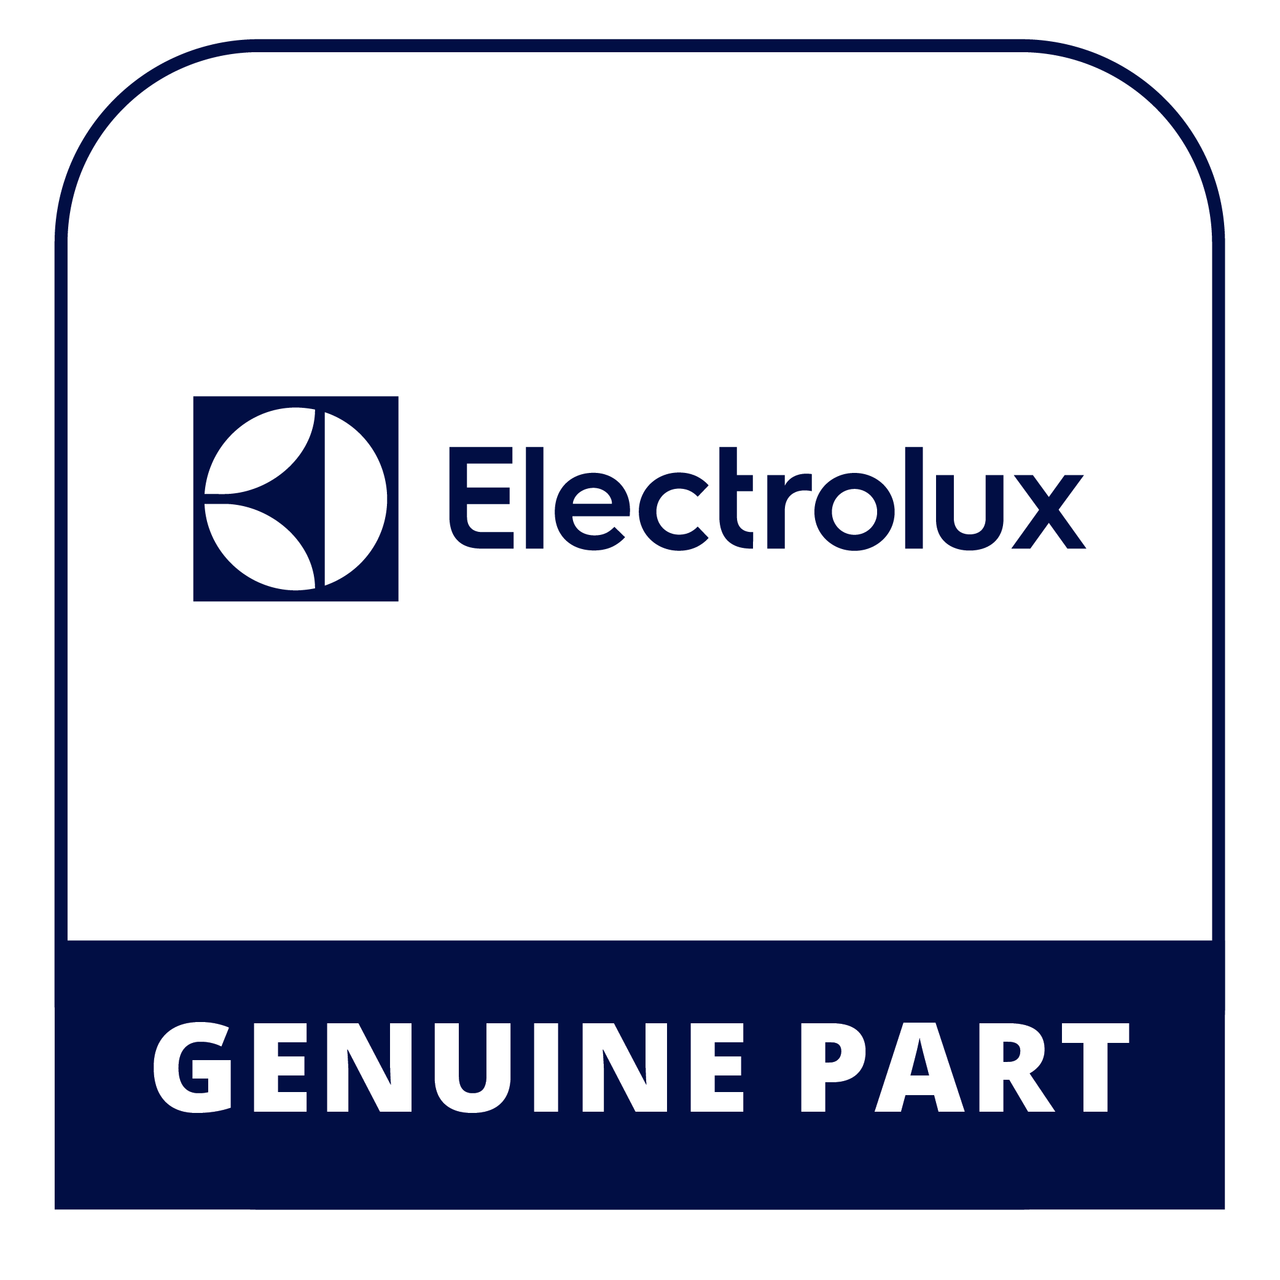 Frigidaire - Electrolux 318200966 Use & Care Guide - Genuine Electrolux Part